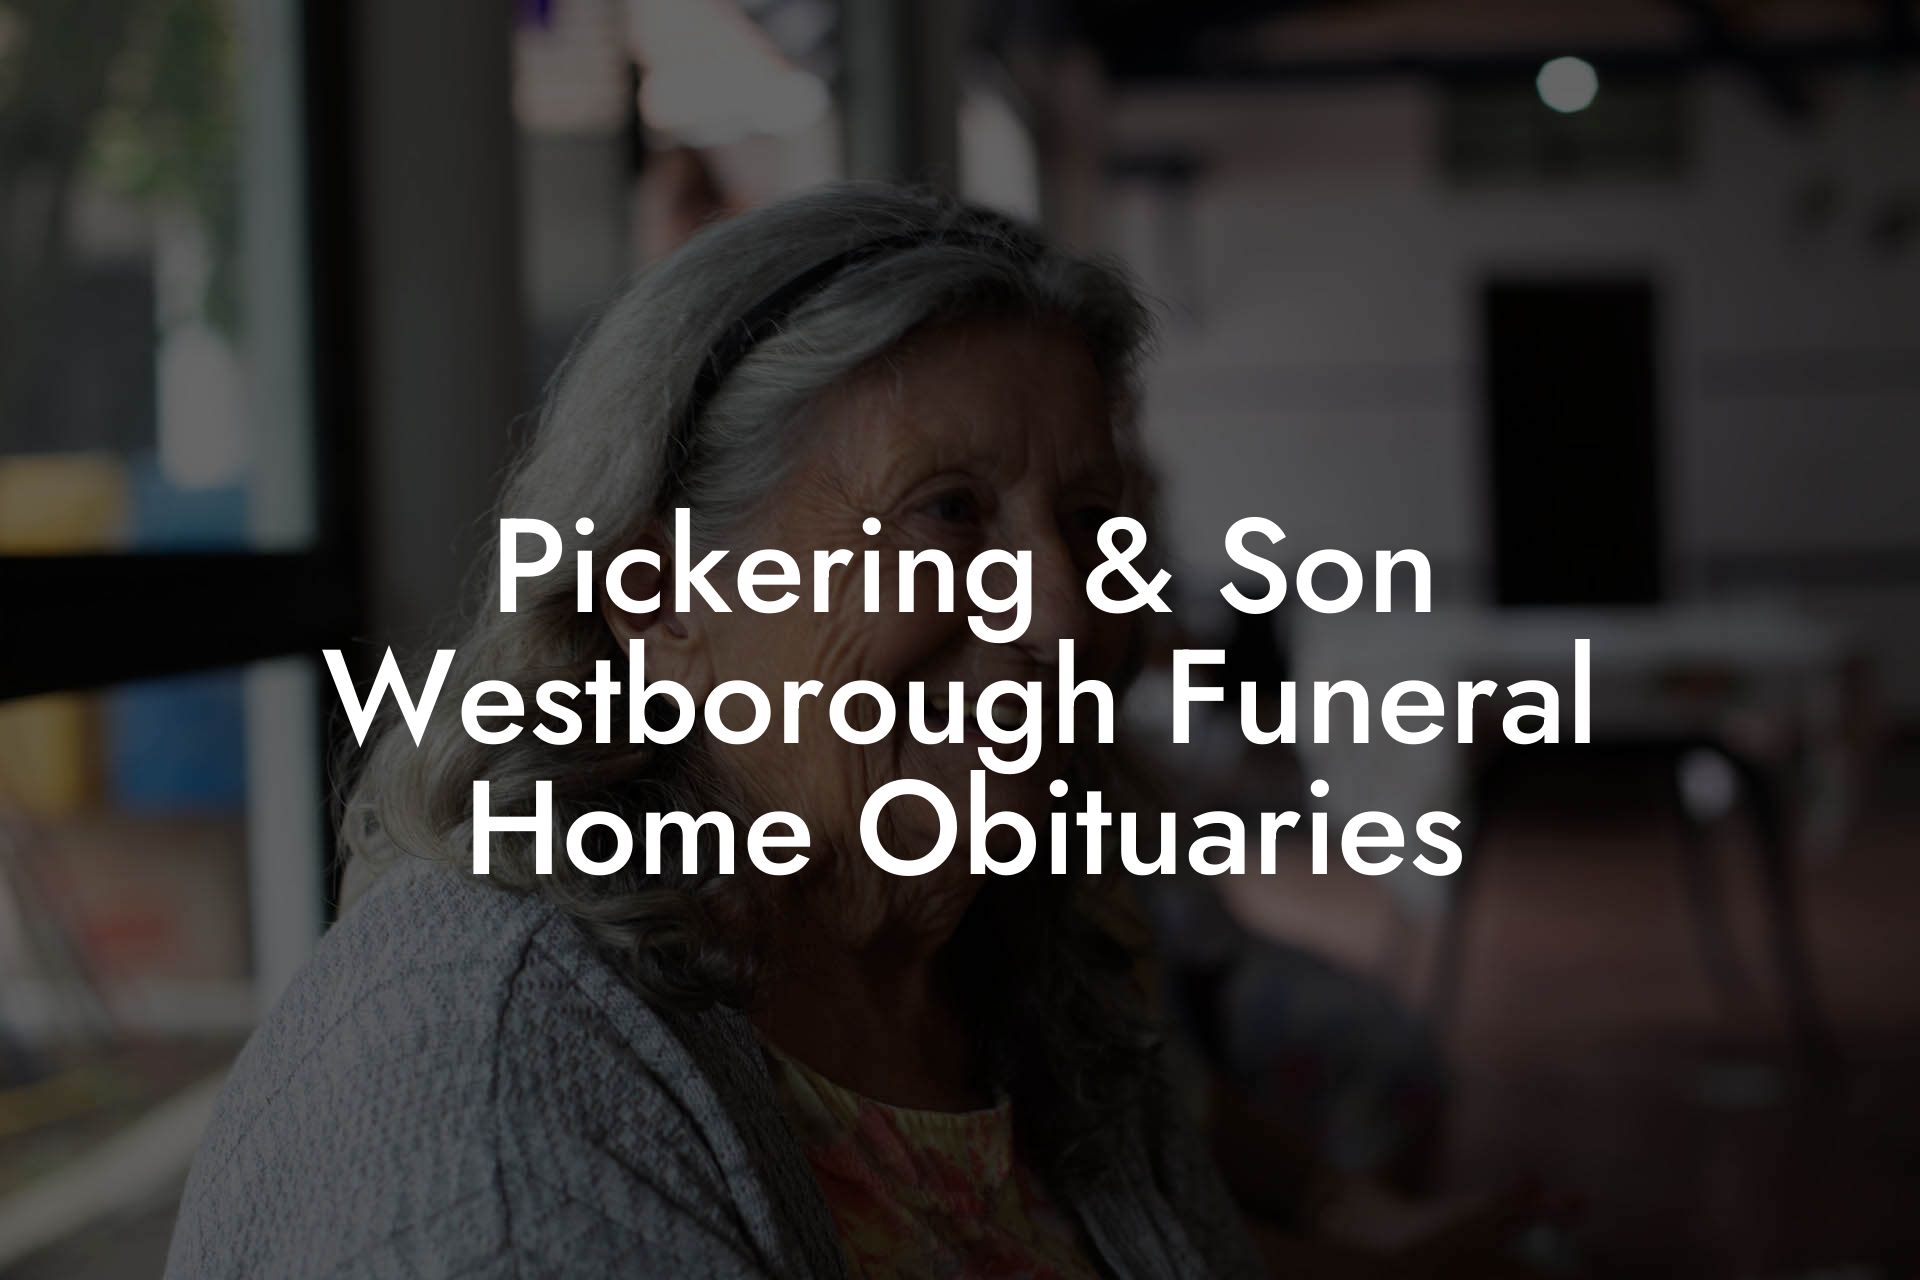 Pickering & Son Westborough Funeral home Obituaries